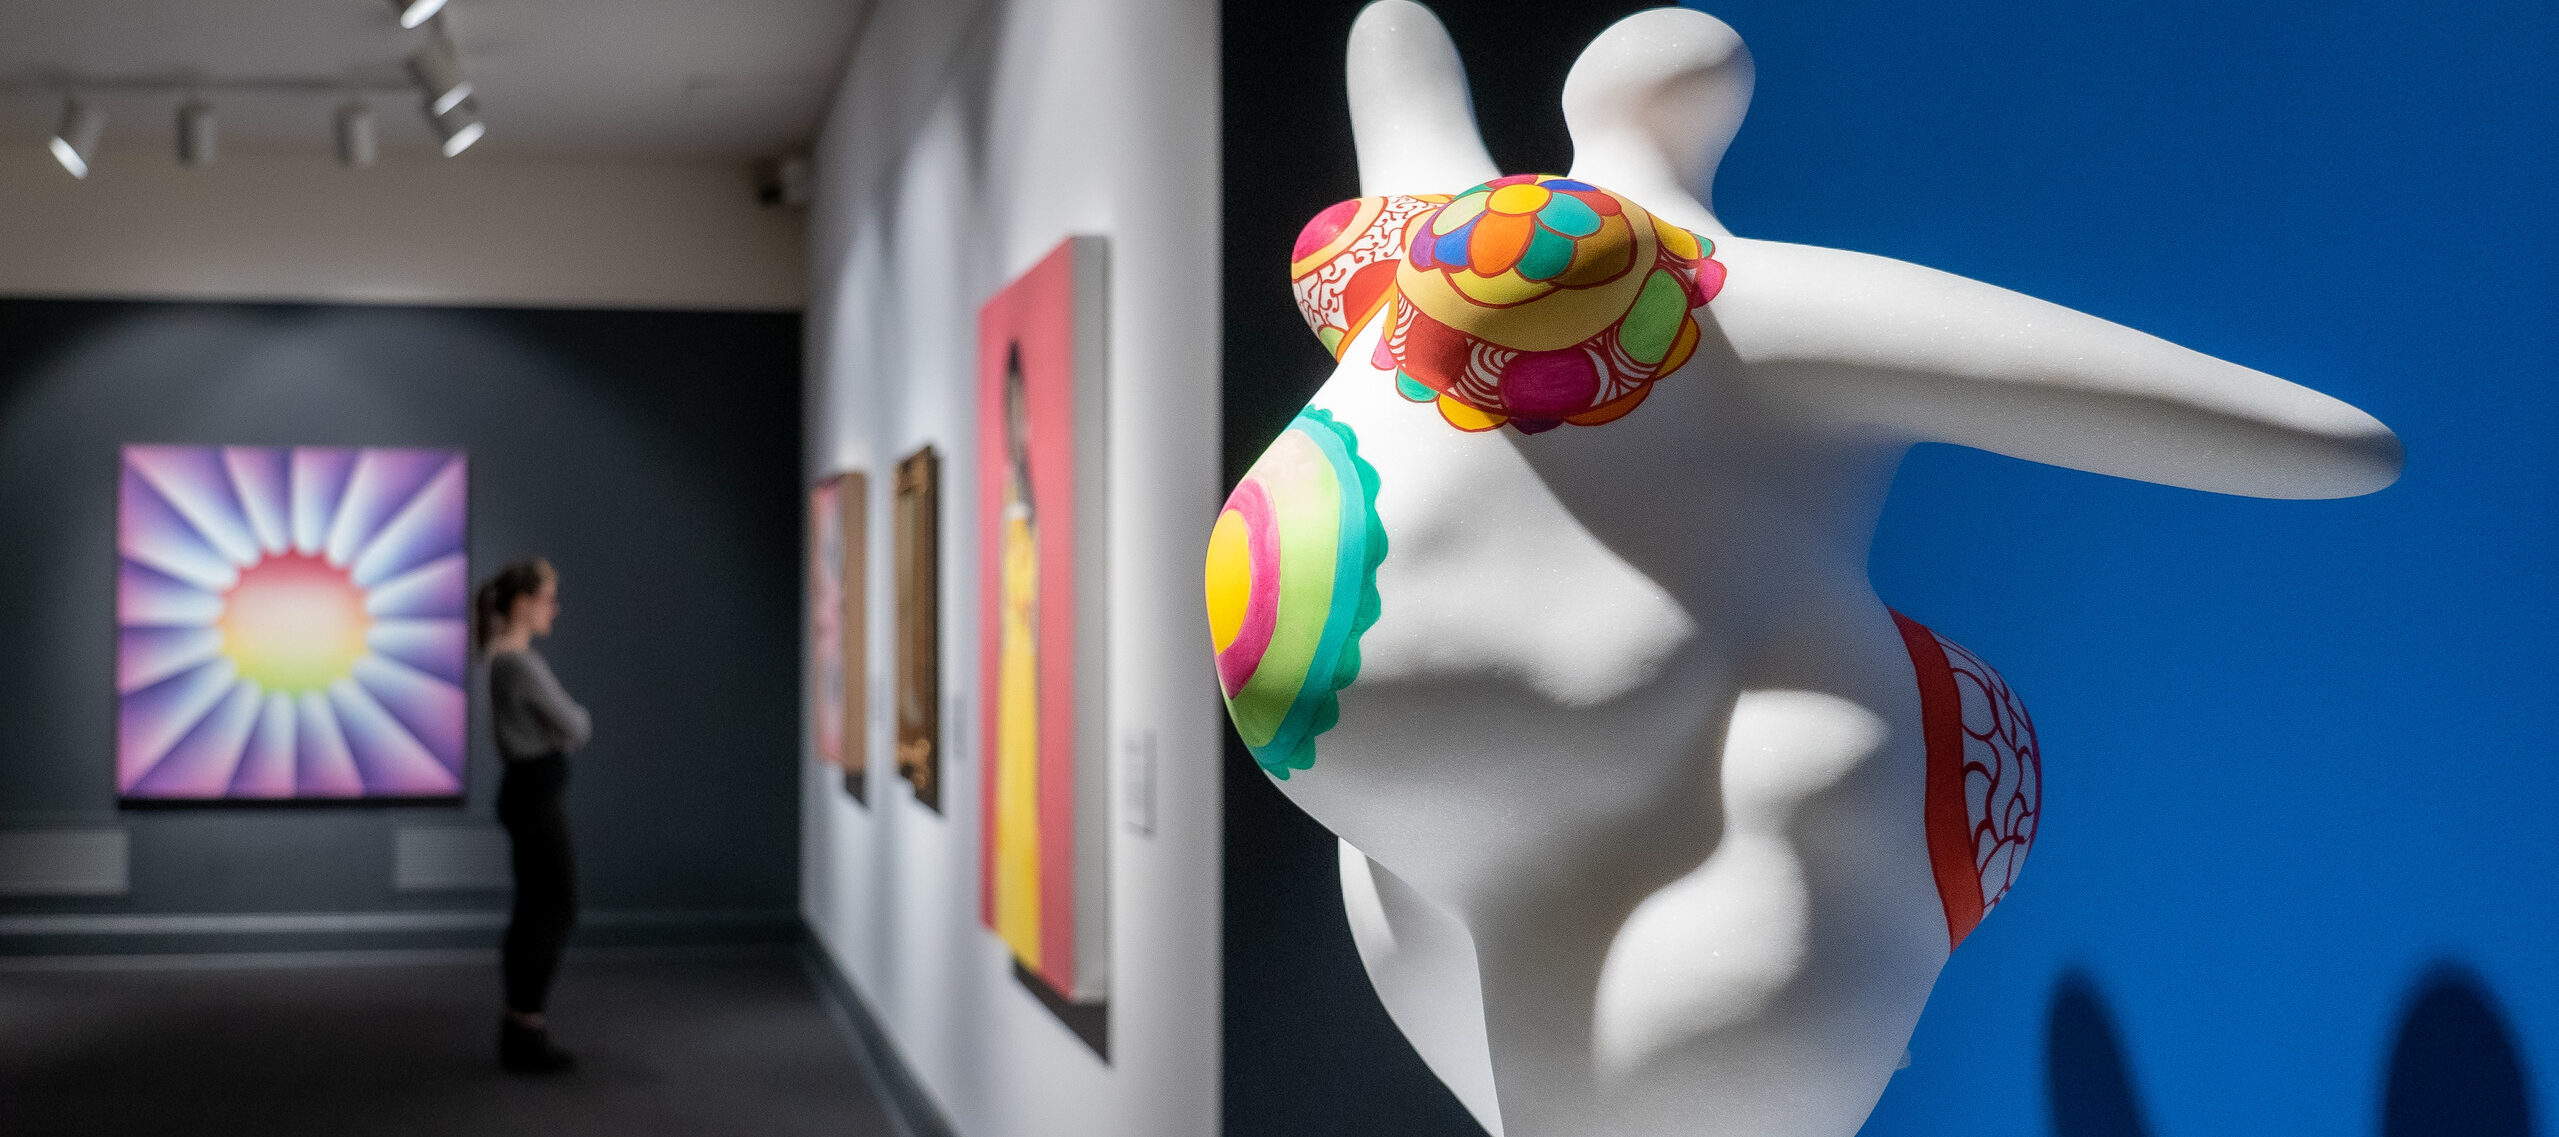 View of the gallery shows an eye-catching marble sculpture in the foreground and a visitor looking at multiple brightly colored artworks in the background. The abstract scupture is of a voluptuous figure with pregnant belly covered in bright patterns and posed with outstretched arms.